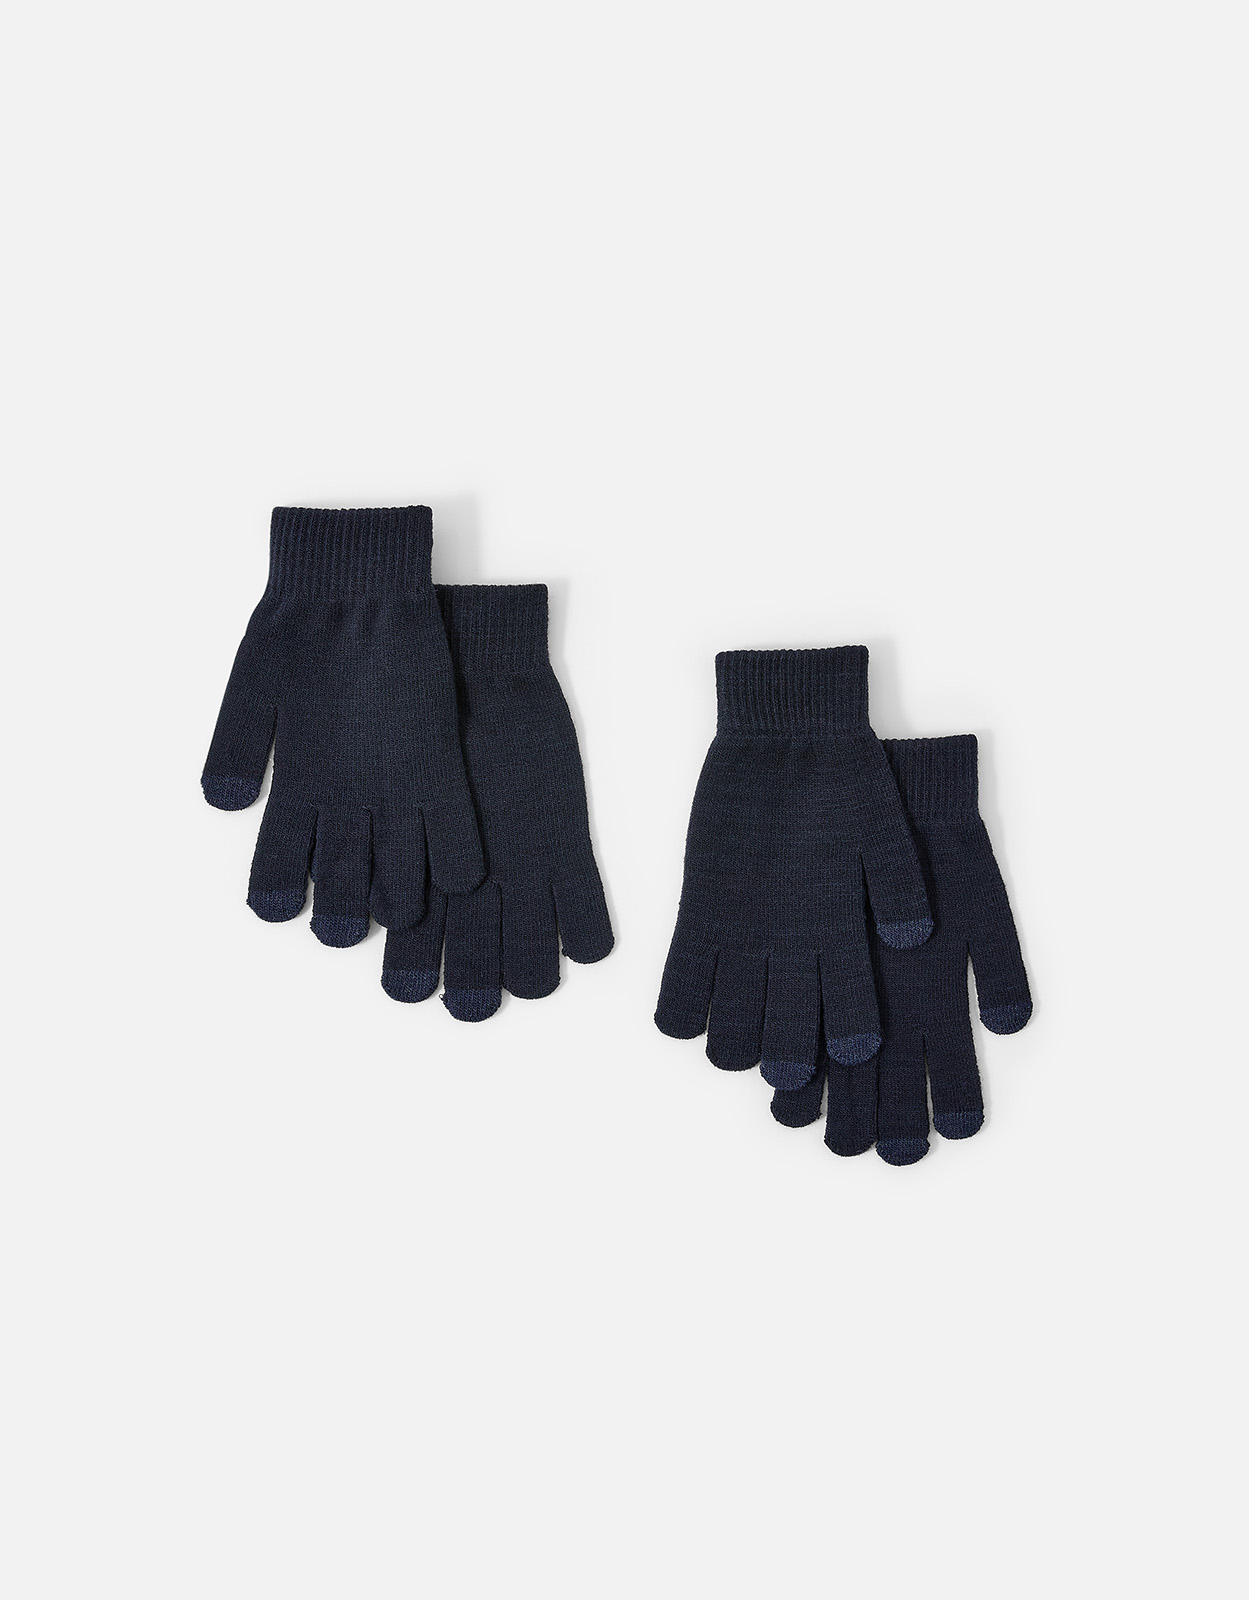 Accessorize Navy Super-Stretch Touchscreen Gloves Set of Two, Size: One Size